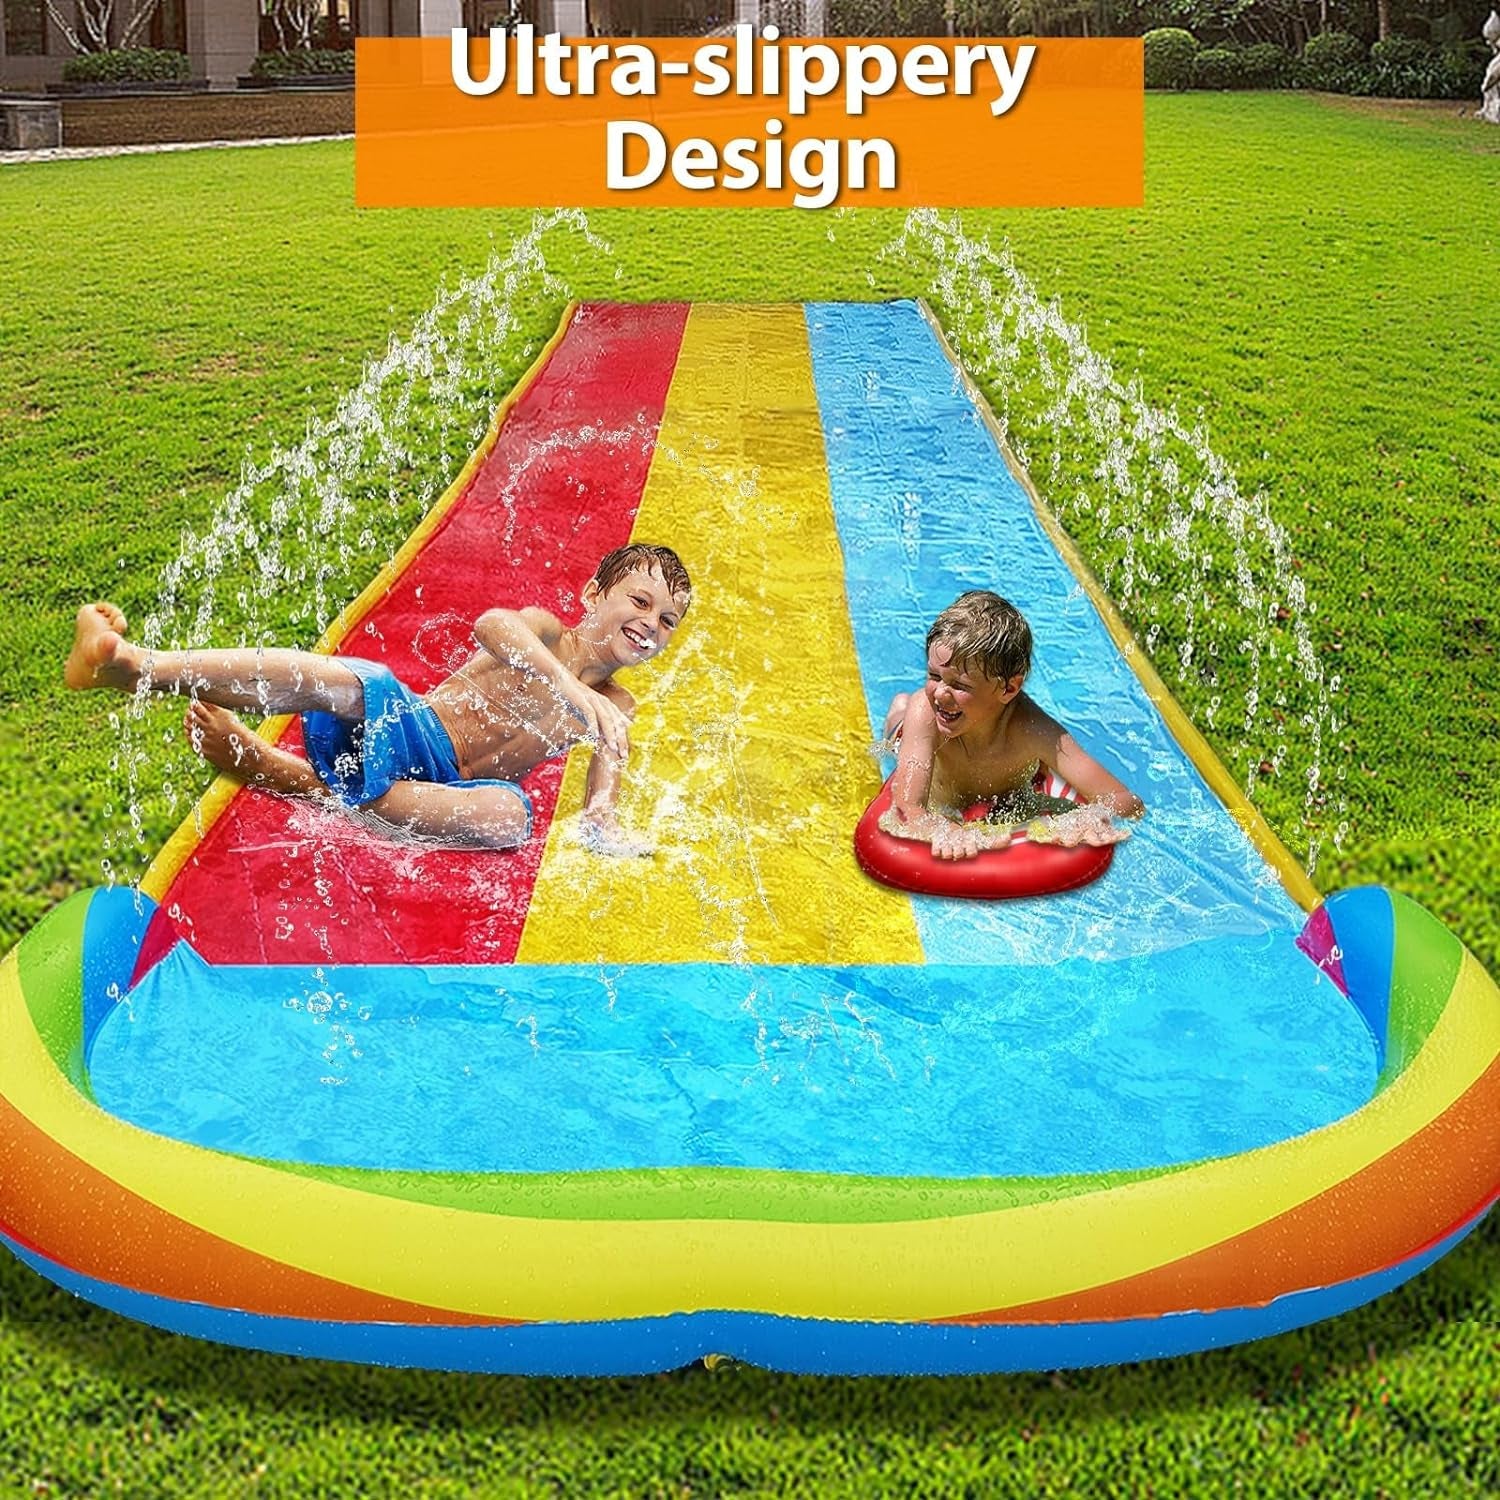 Slip Water Slide with Sprinklers, 22.5Ft Slip and Slide with 3 Inflatable Bodyboards and Splash Pool Waterslide for Kids Backyard Lawn Outdoor Water Toy